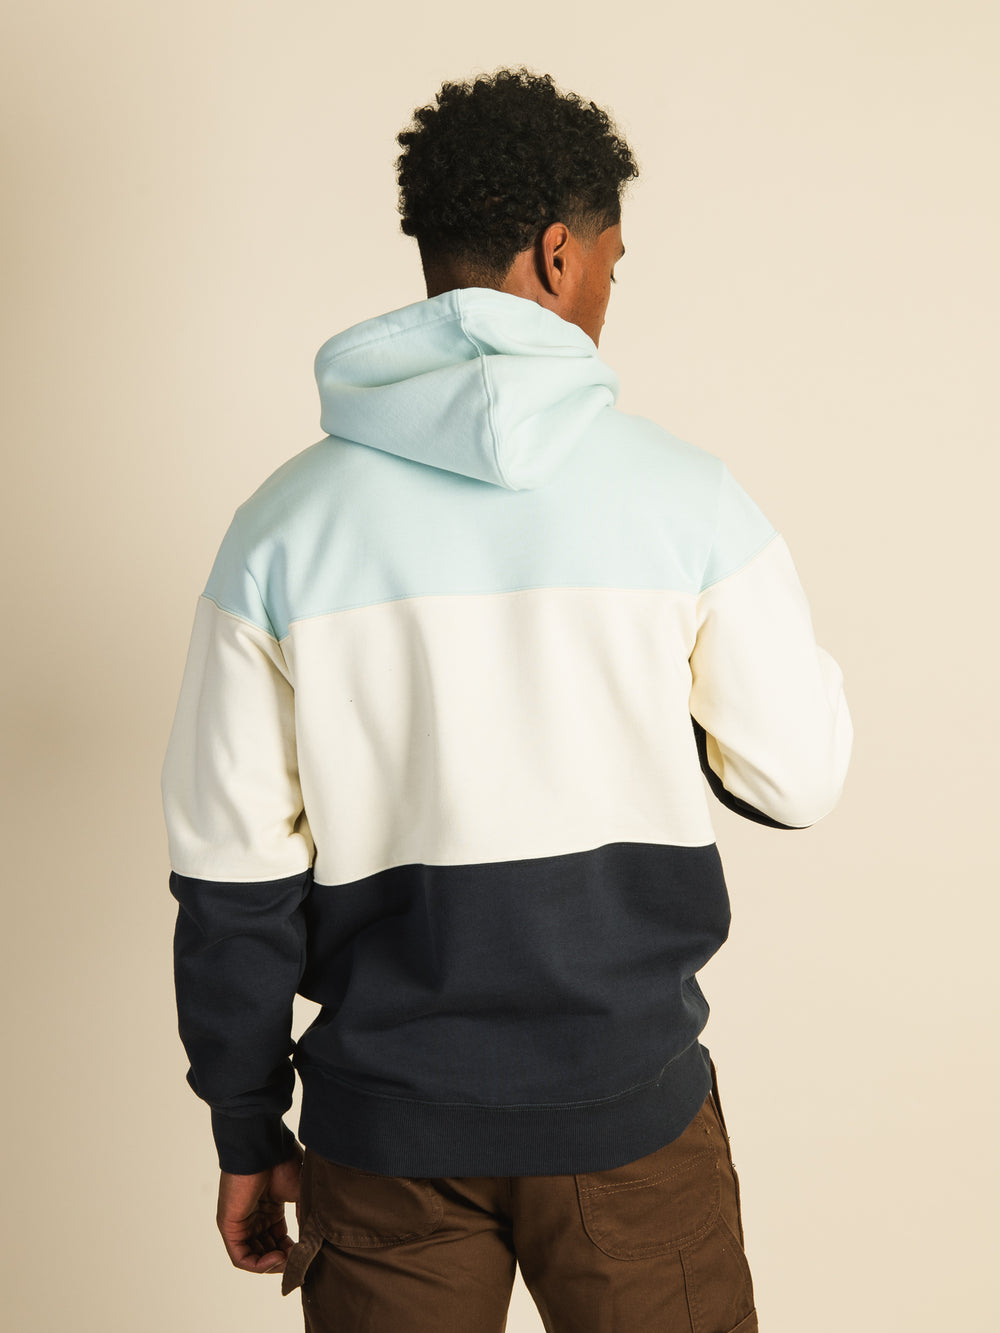 RUSSELL ATHLETIC STYLE COLOUR BLOCK PULL OVER HOODIE